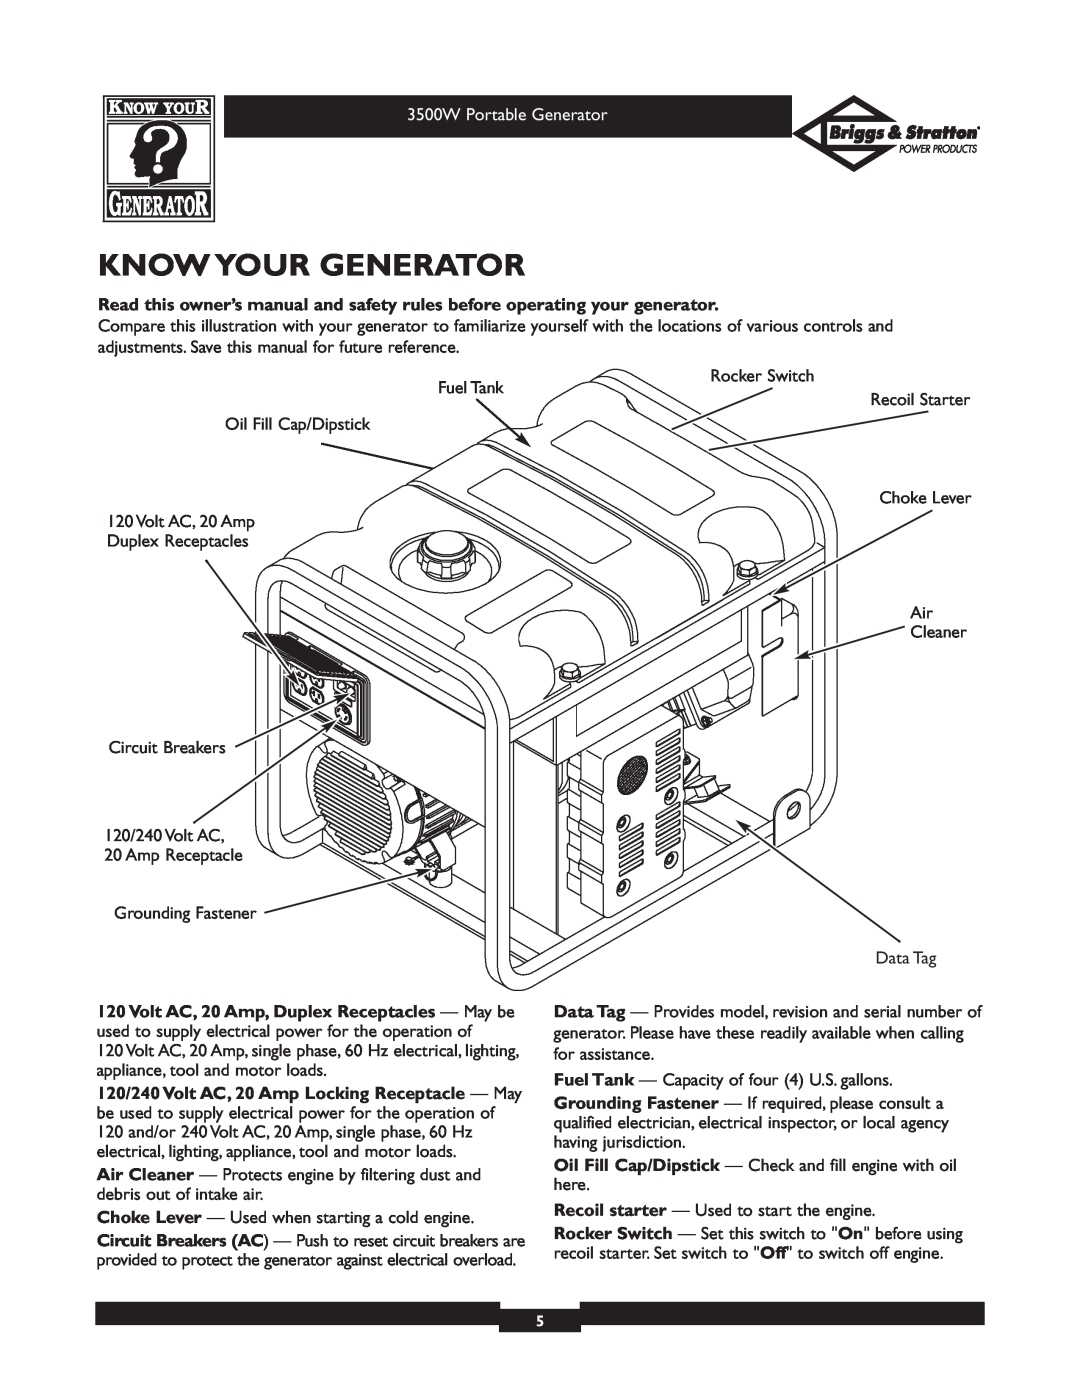 Briggs & Stratton 30208 owner manual Know Your Generator, 3500W Portable Generator 